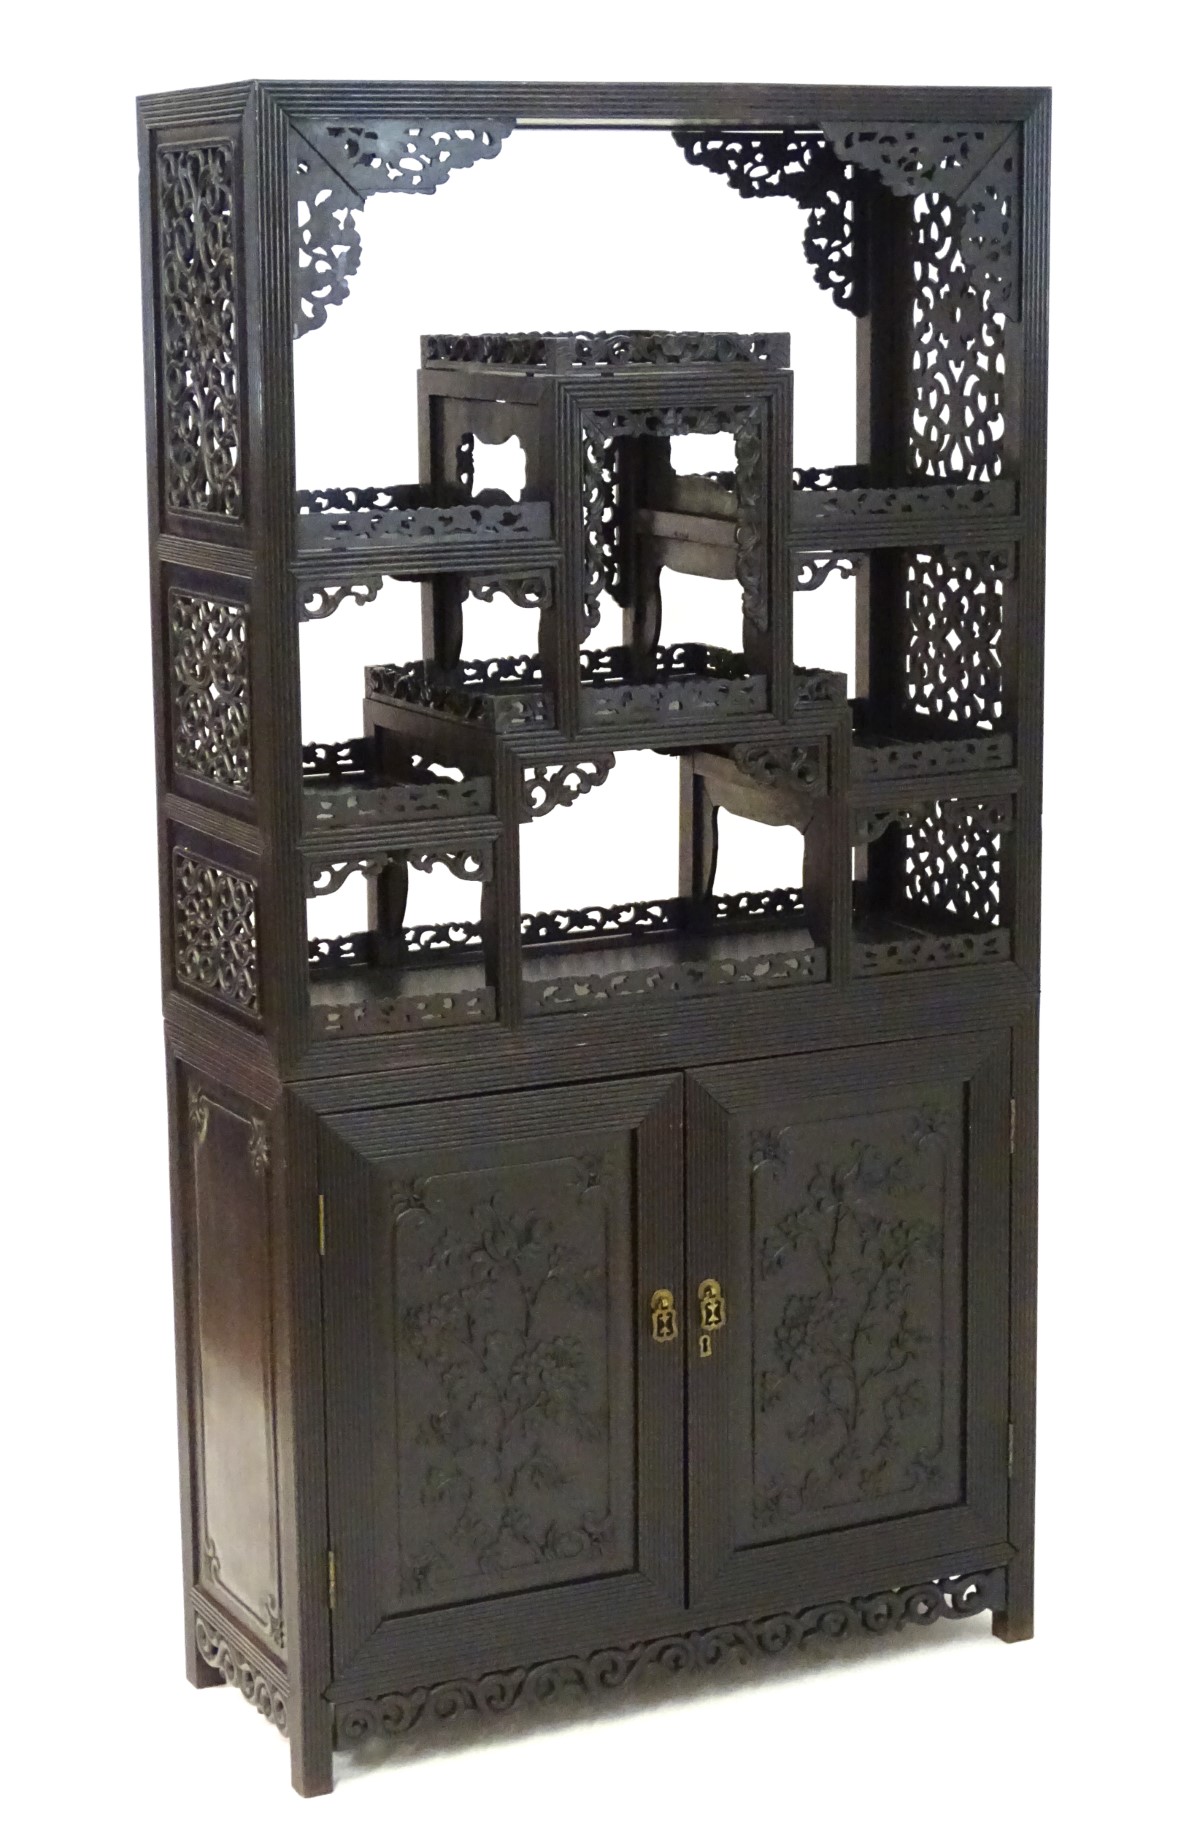 A late 19thC / early 20thC Chinese hardwood cabinet with open display shelves resting on a cupboard